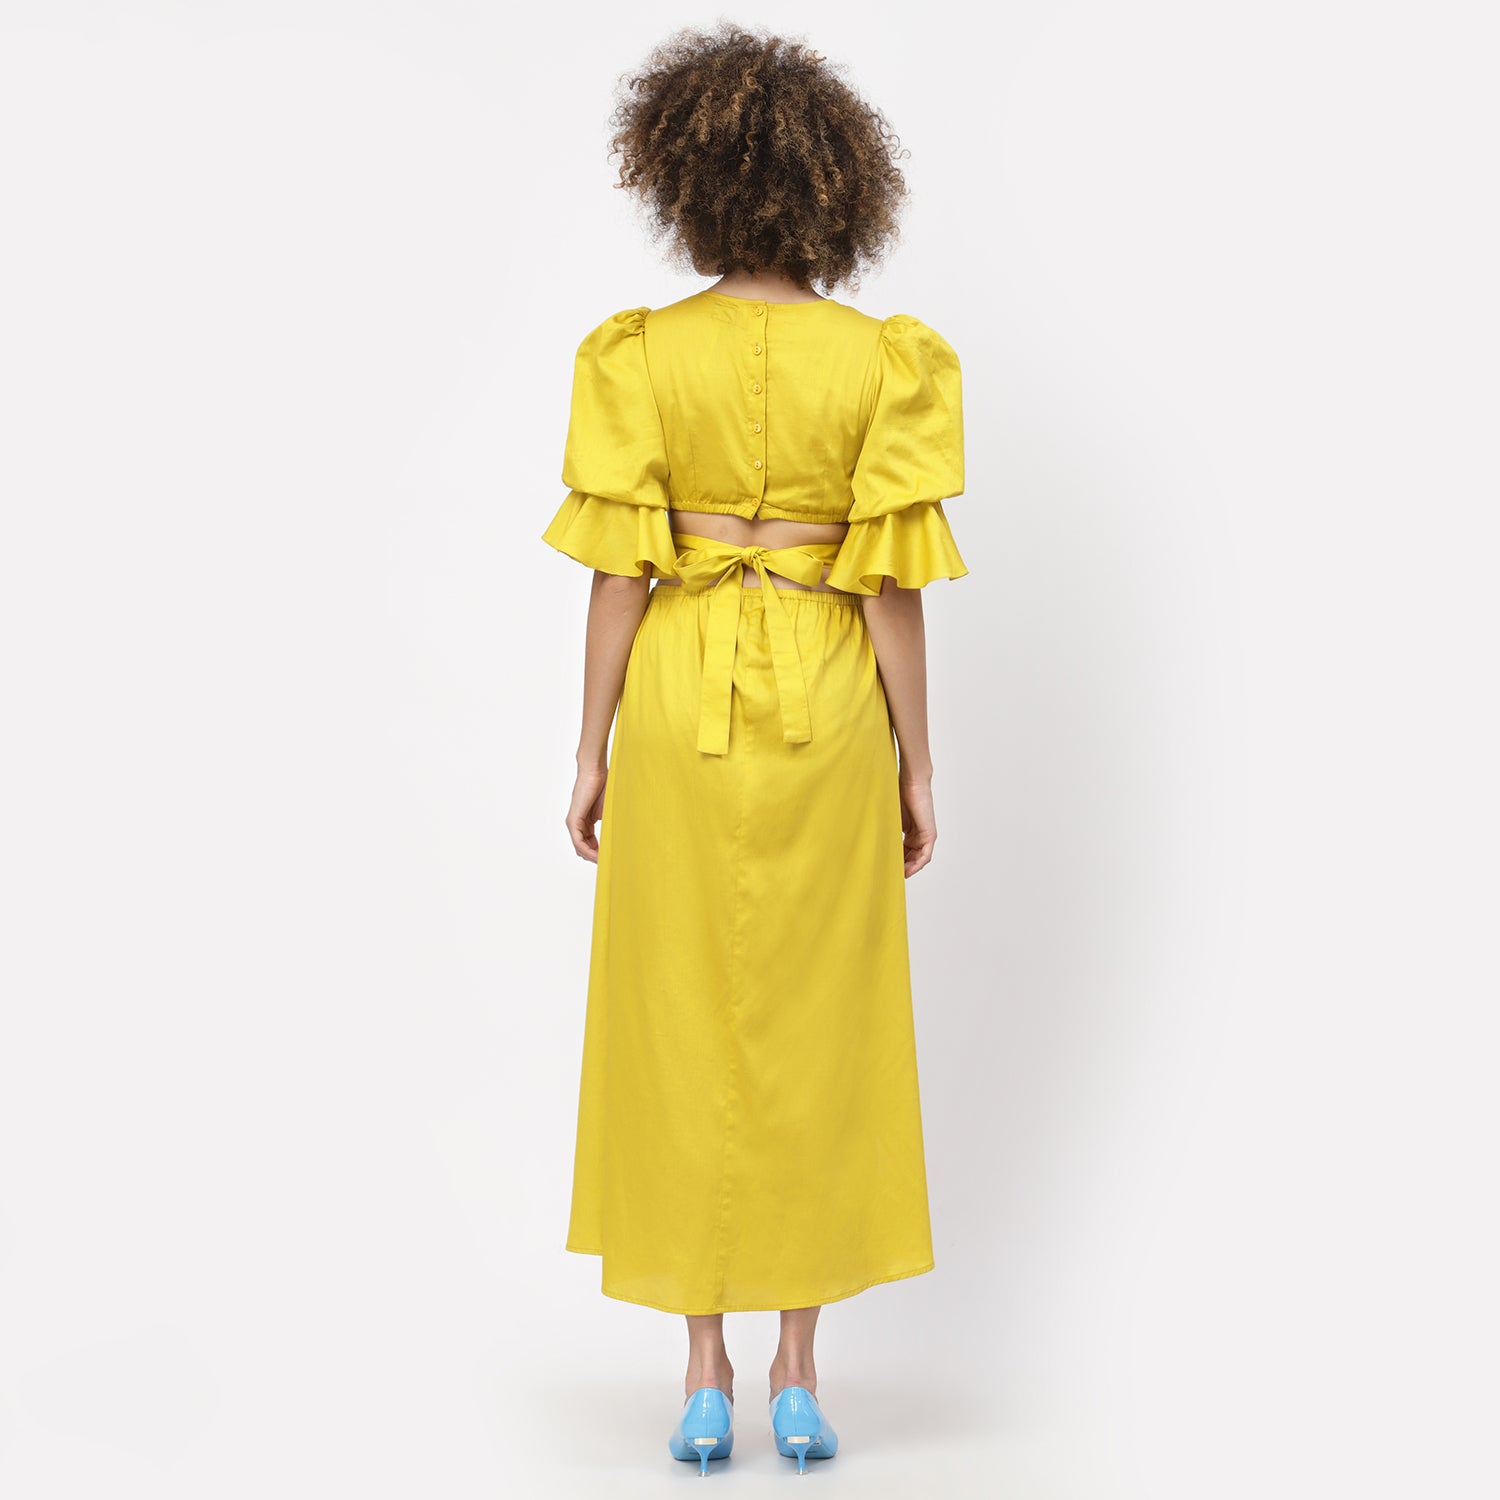 Yellow Dress With Lace Yoke And Tie Belt